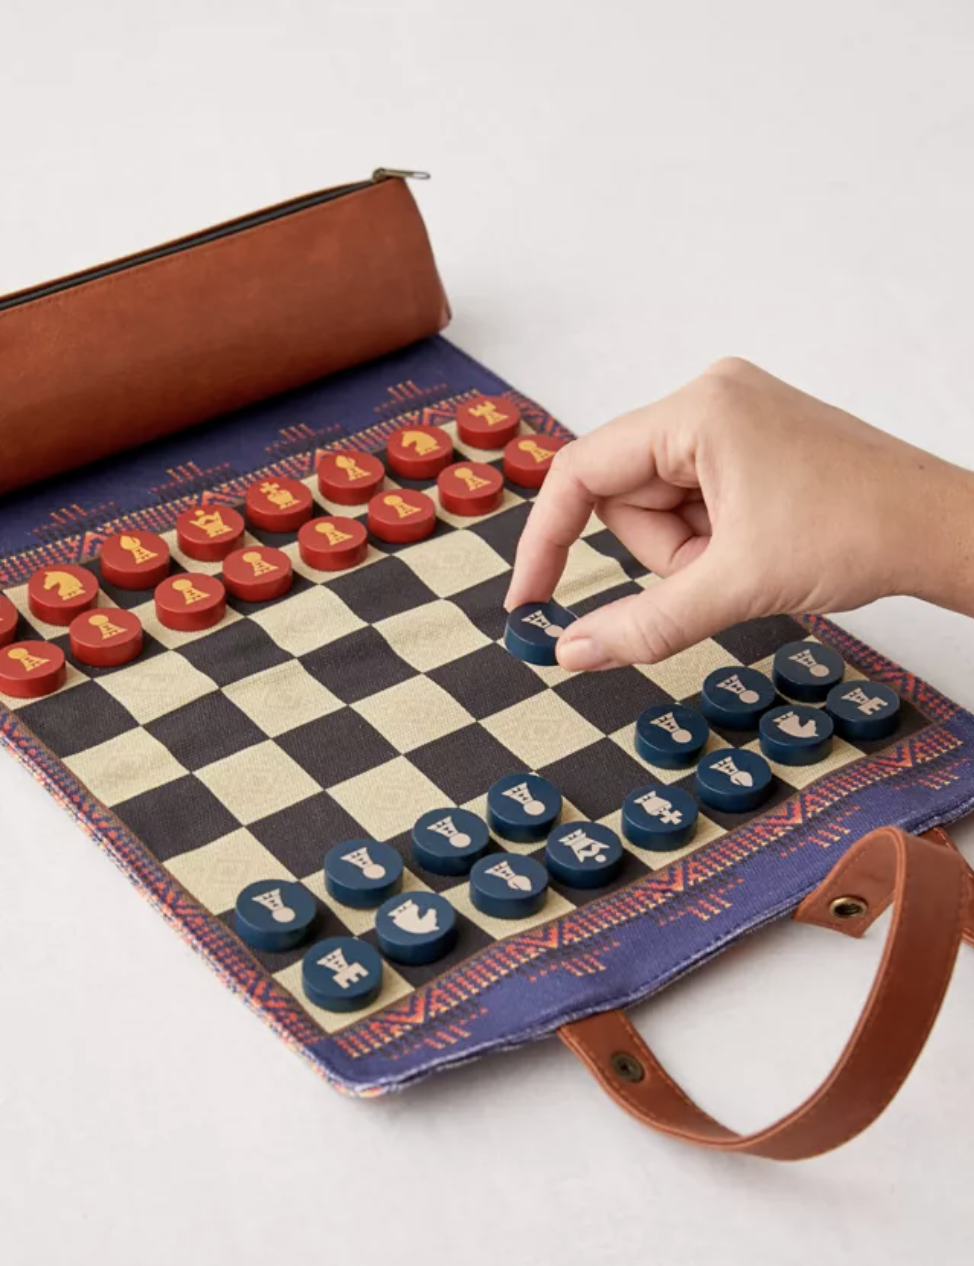 Model moving blue pawn on a fabric chessboard